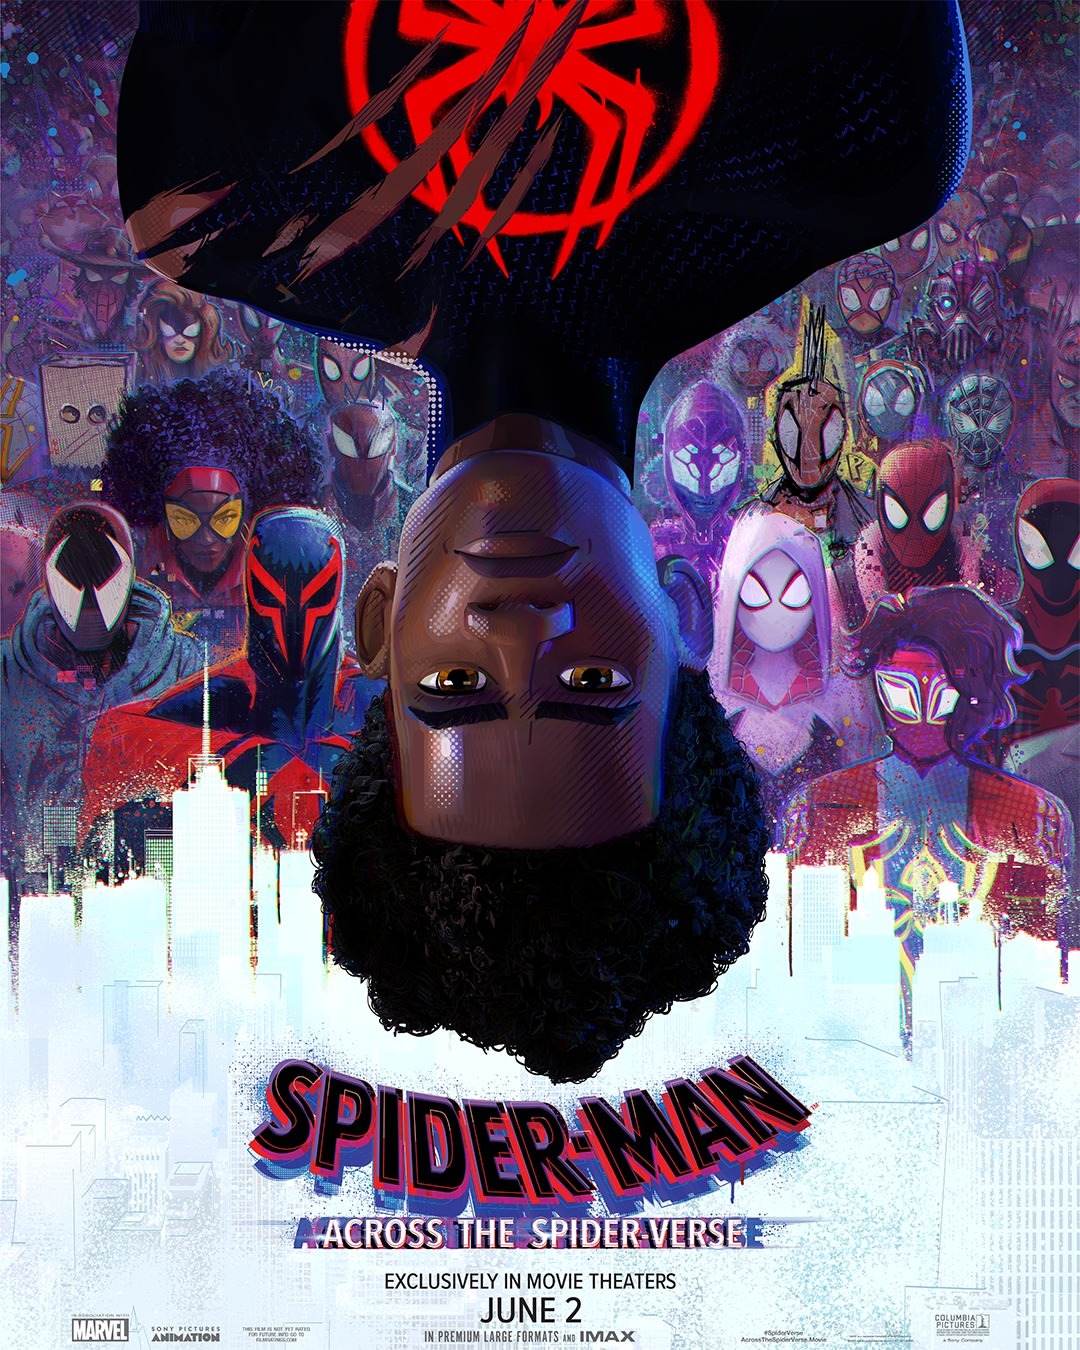 Another sequel that delighted and surprised audiences was Spider-Man: Across the Spider-Verse, the follow-up to the acclaimed 2018 animated film Spider-Man: Into the Spider-Verse. 